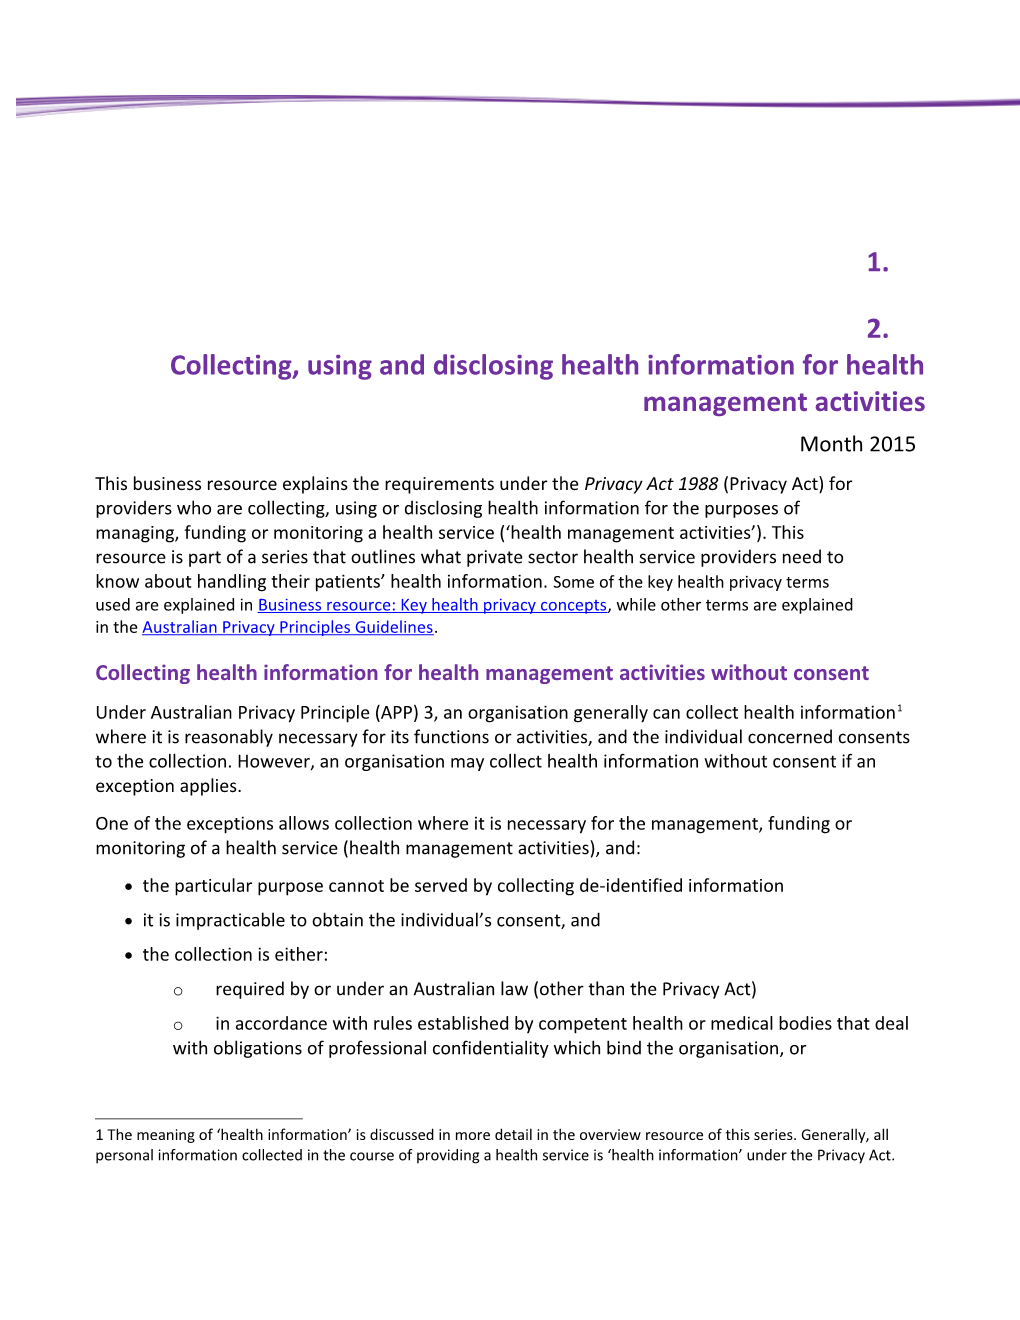 Collecting, Using and Disclosing Health Information for Health Management Activities